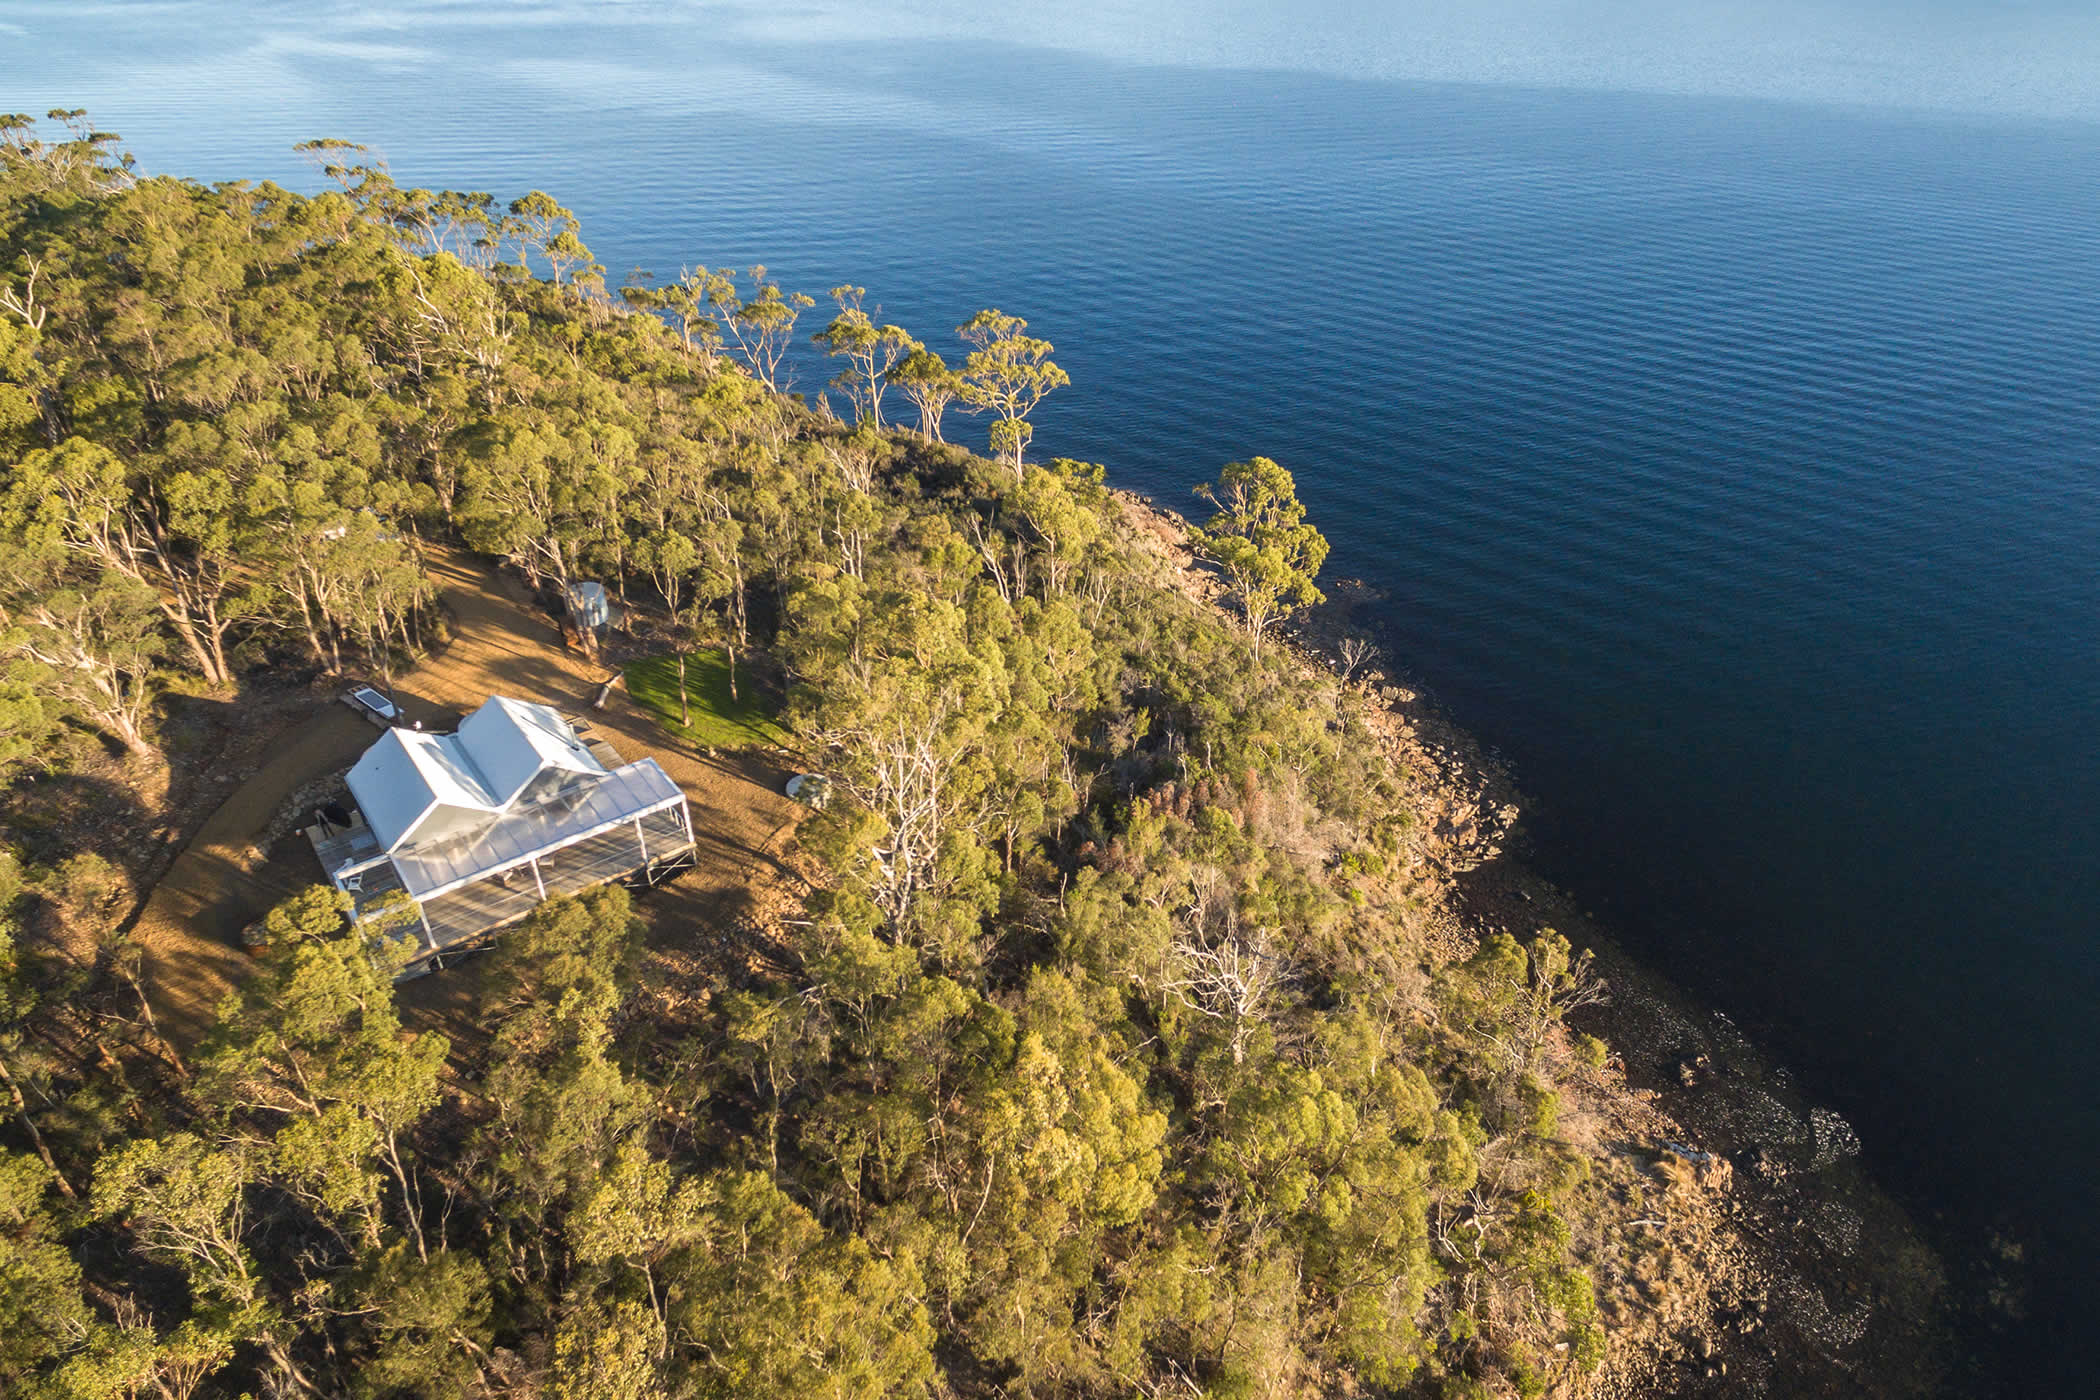 The Boat House, Blubber Head, Tasmania: An aerial view shows the remote luxury Boat House accommodation set on a private peninsula in forest acreage surrounded by sea, with walking access to the nearby water’s edge. Photo by Open2View.